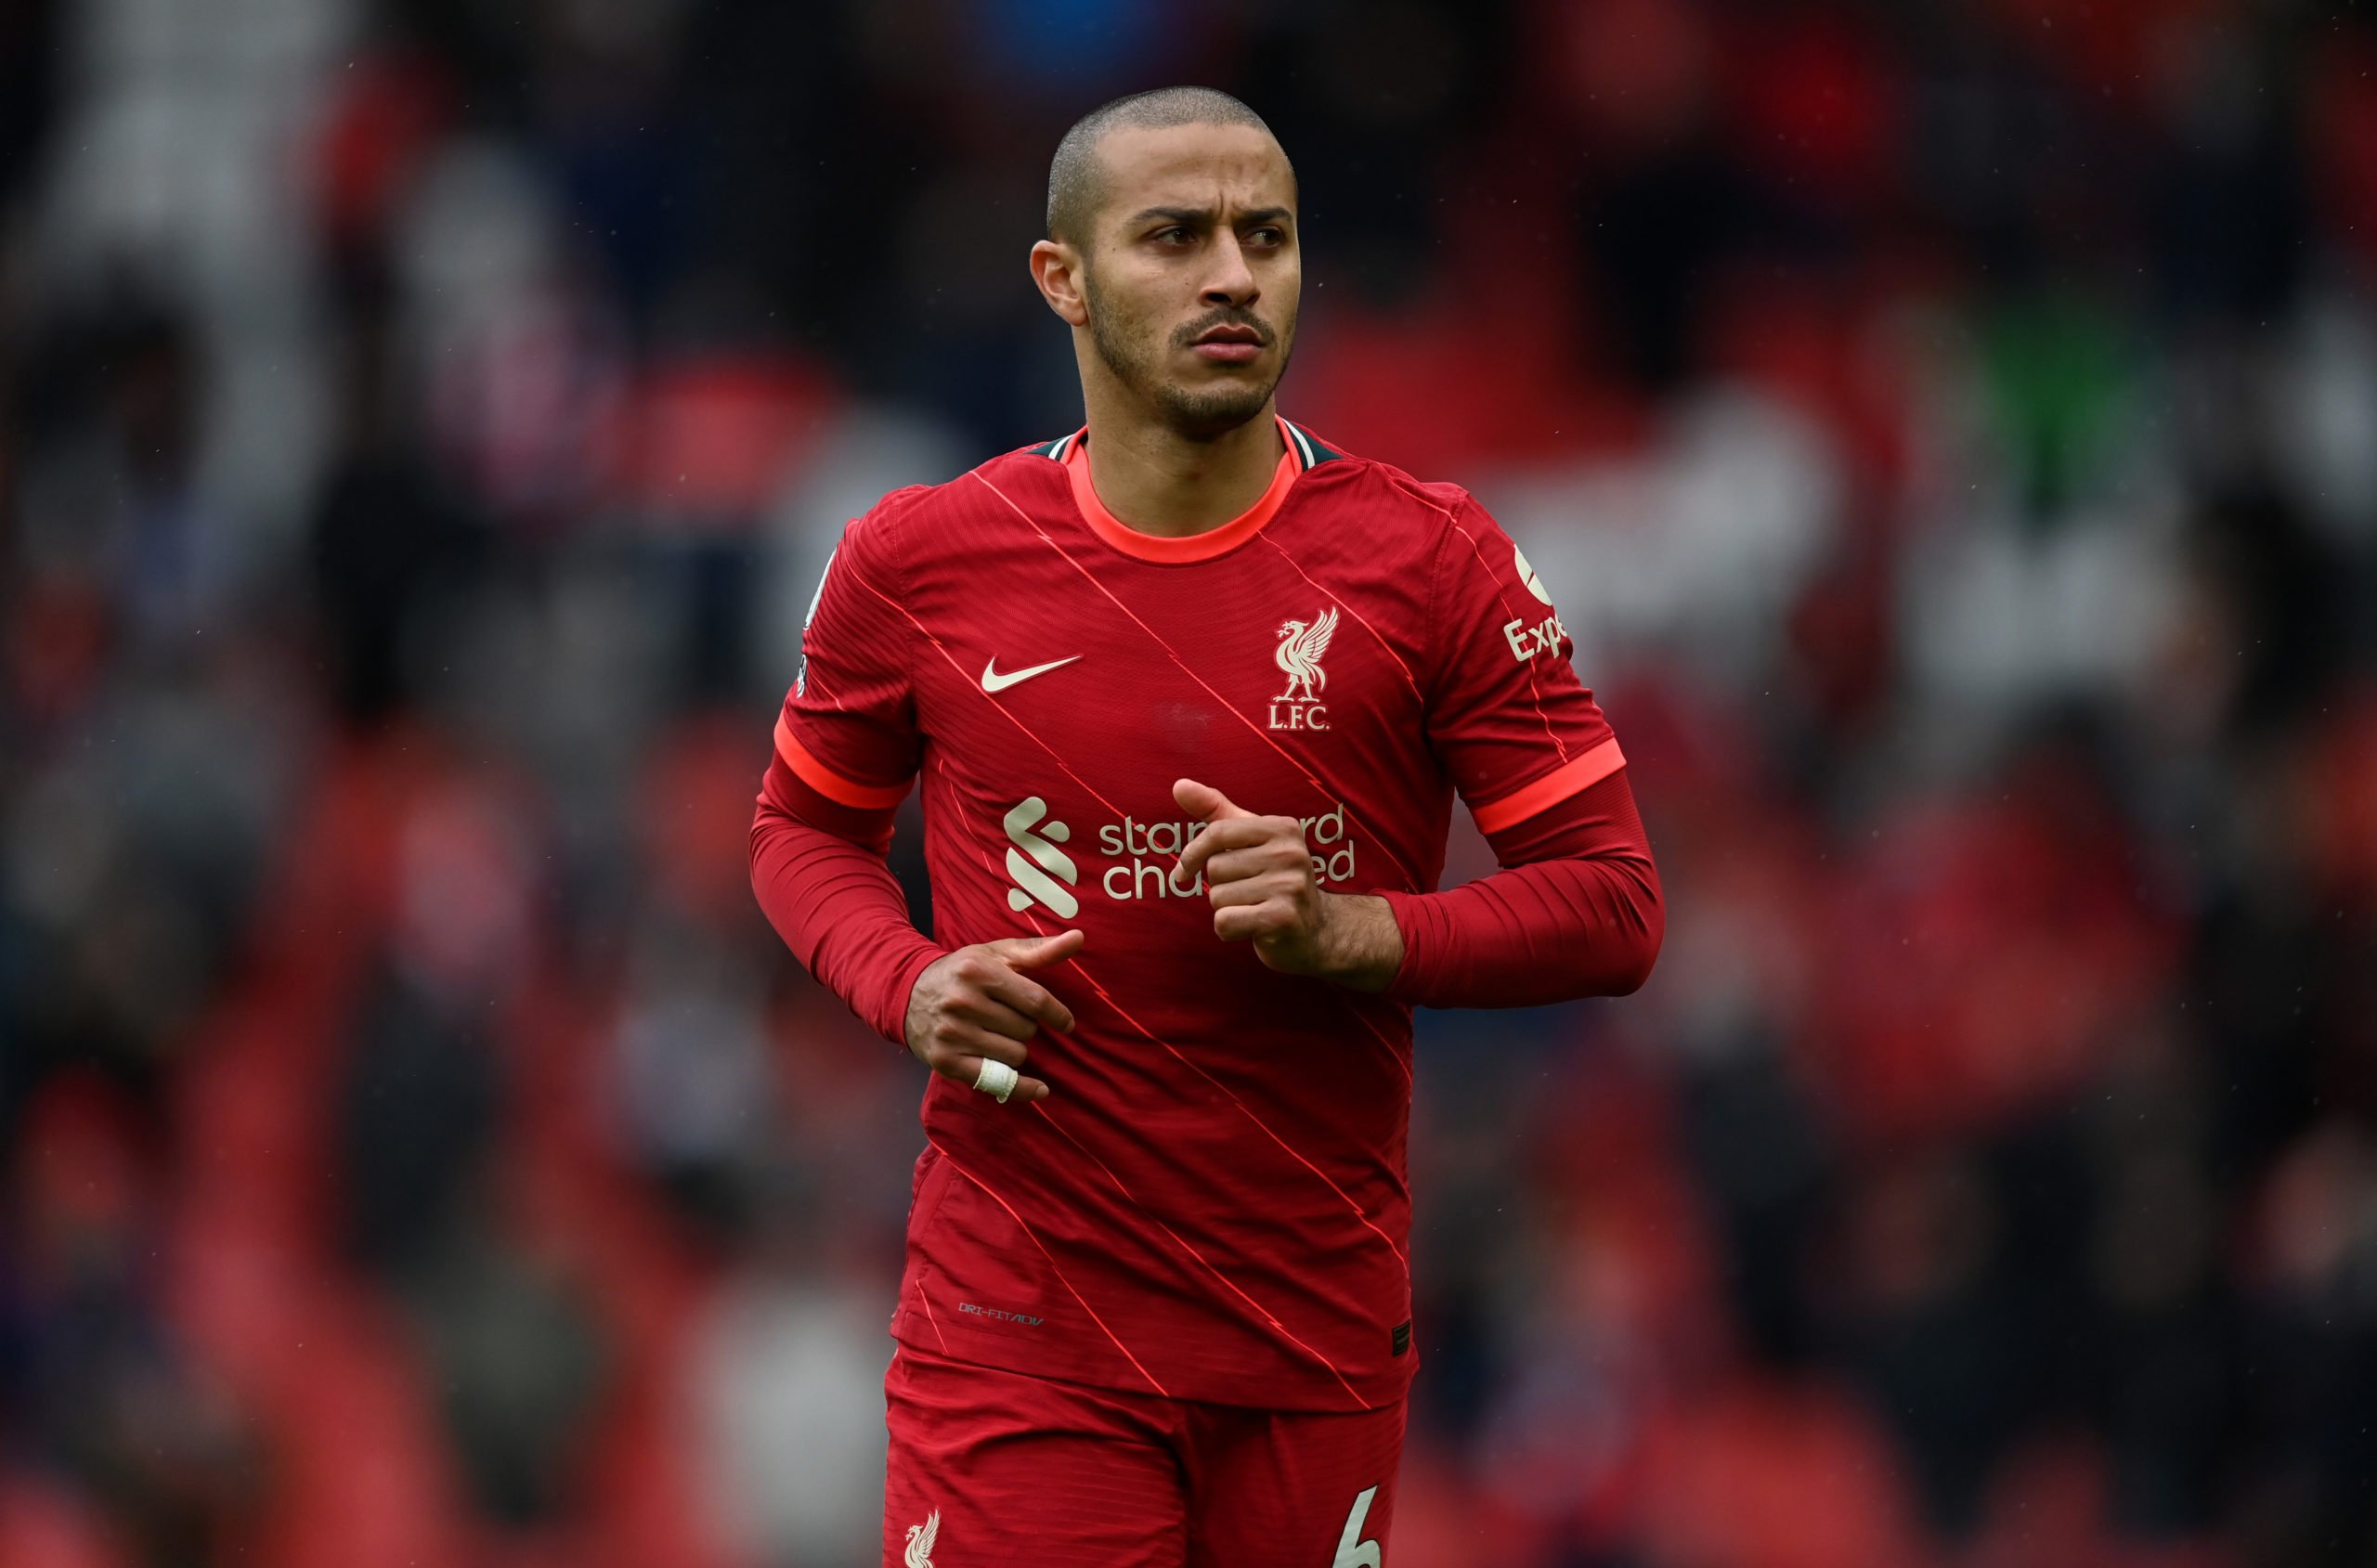 LIVERPOOL, ENGLAND - MAY 23: Thiago Alcântara of Liverpool during the Premier League match between Liverpool and Crystal Palace at Anfield on May 23, 2021 in Liverpool, England. (Photo by Gareth Copley/Getty Images)The 4th Official uses images provided by the following image agency: Getty Images (https://www.gettyimages.de/) and Imago Images (https://www.imago-images.de/)